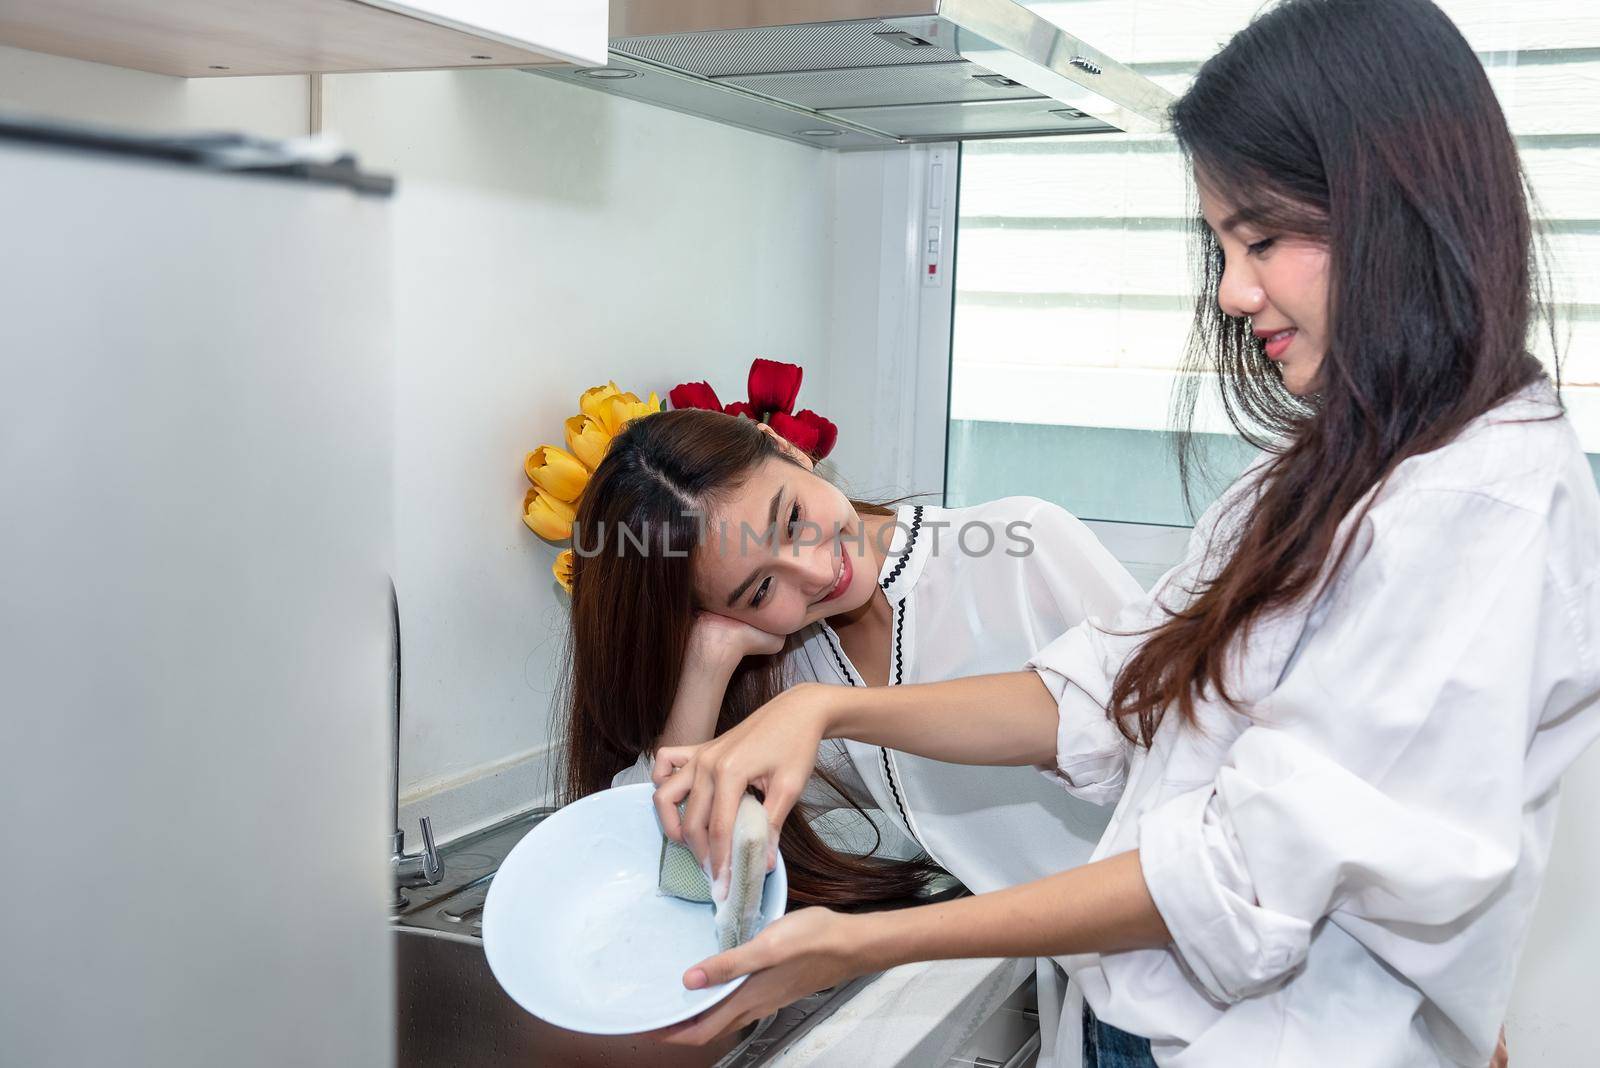 Two Asian women washing dishes together in kitchen. People and Lifestyles concept. LGBT pride and Lesbians theme.